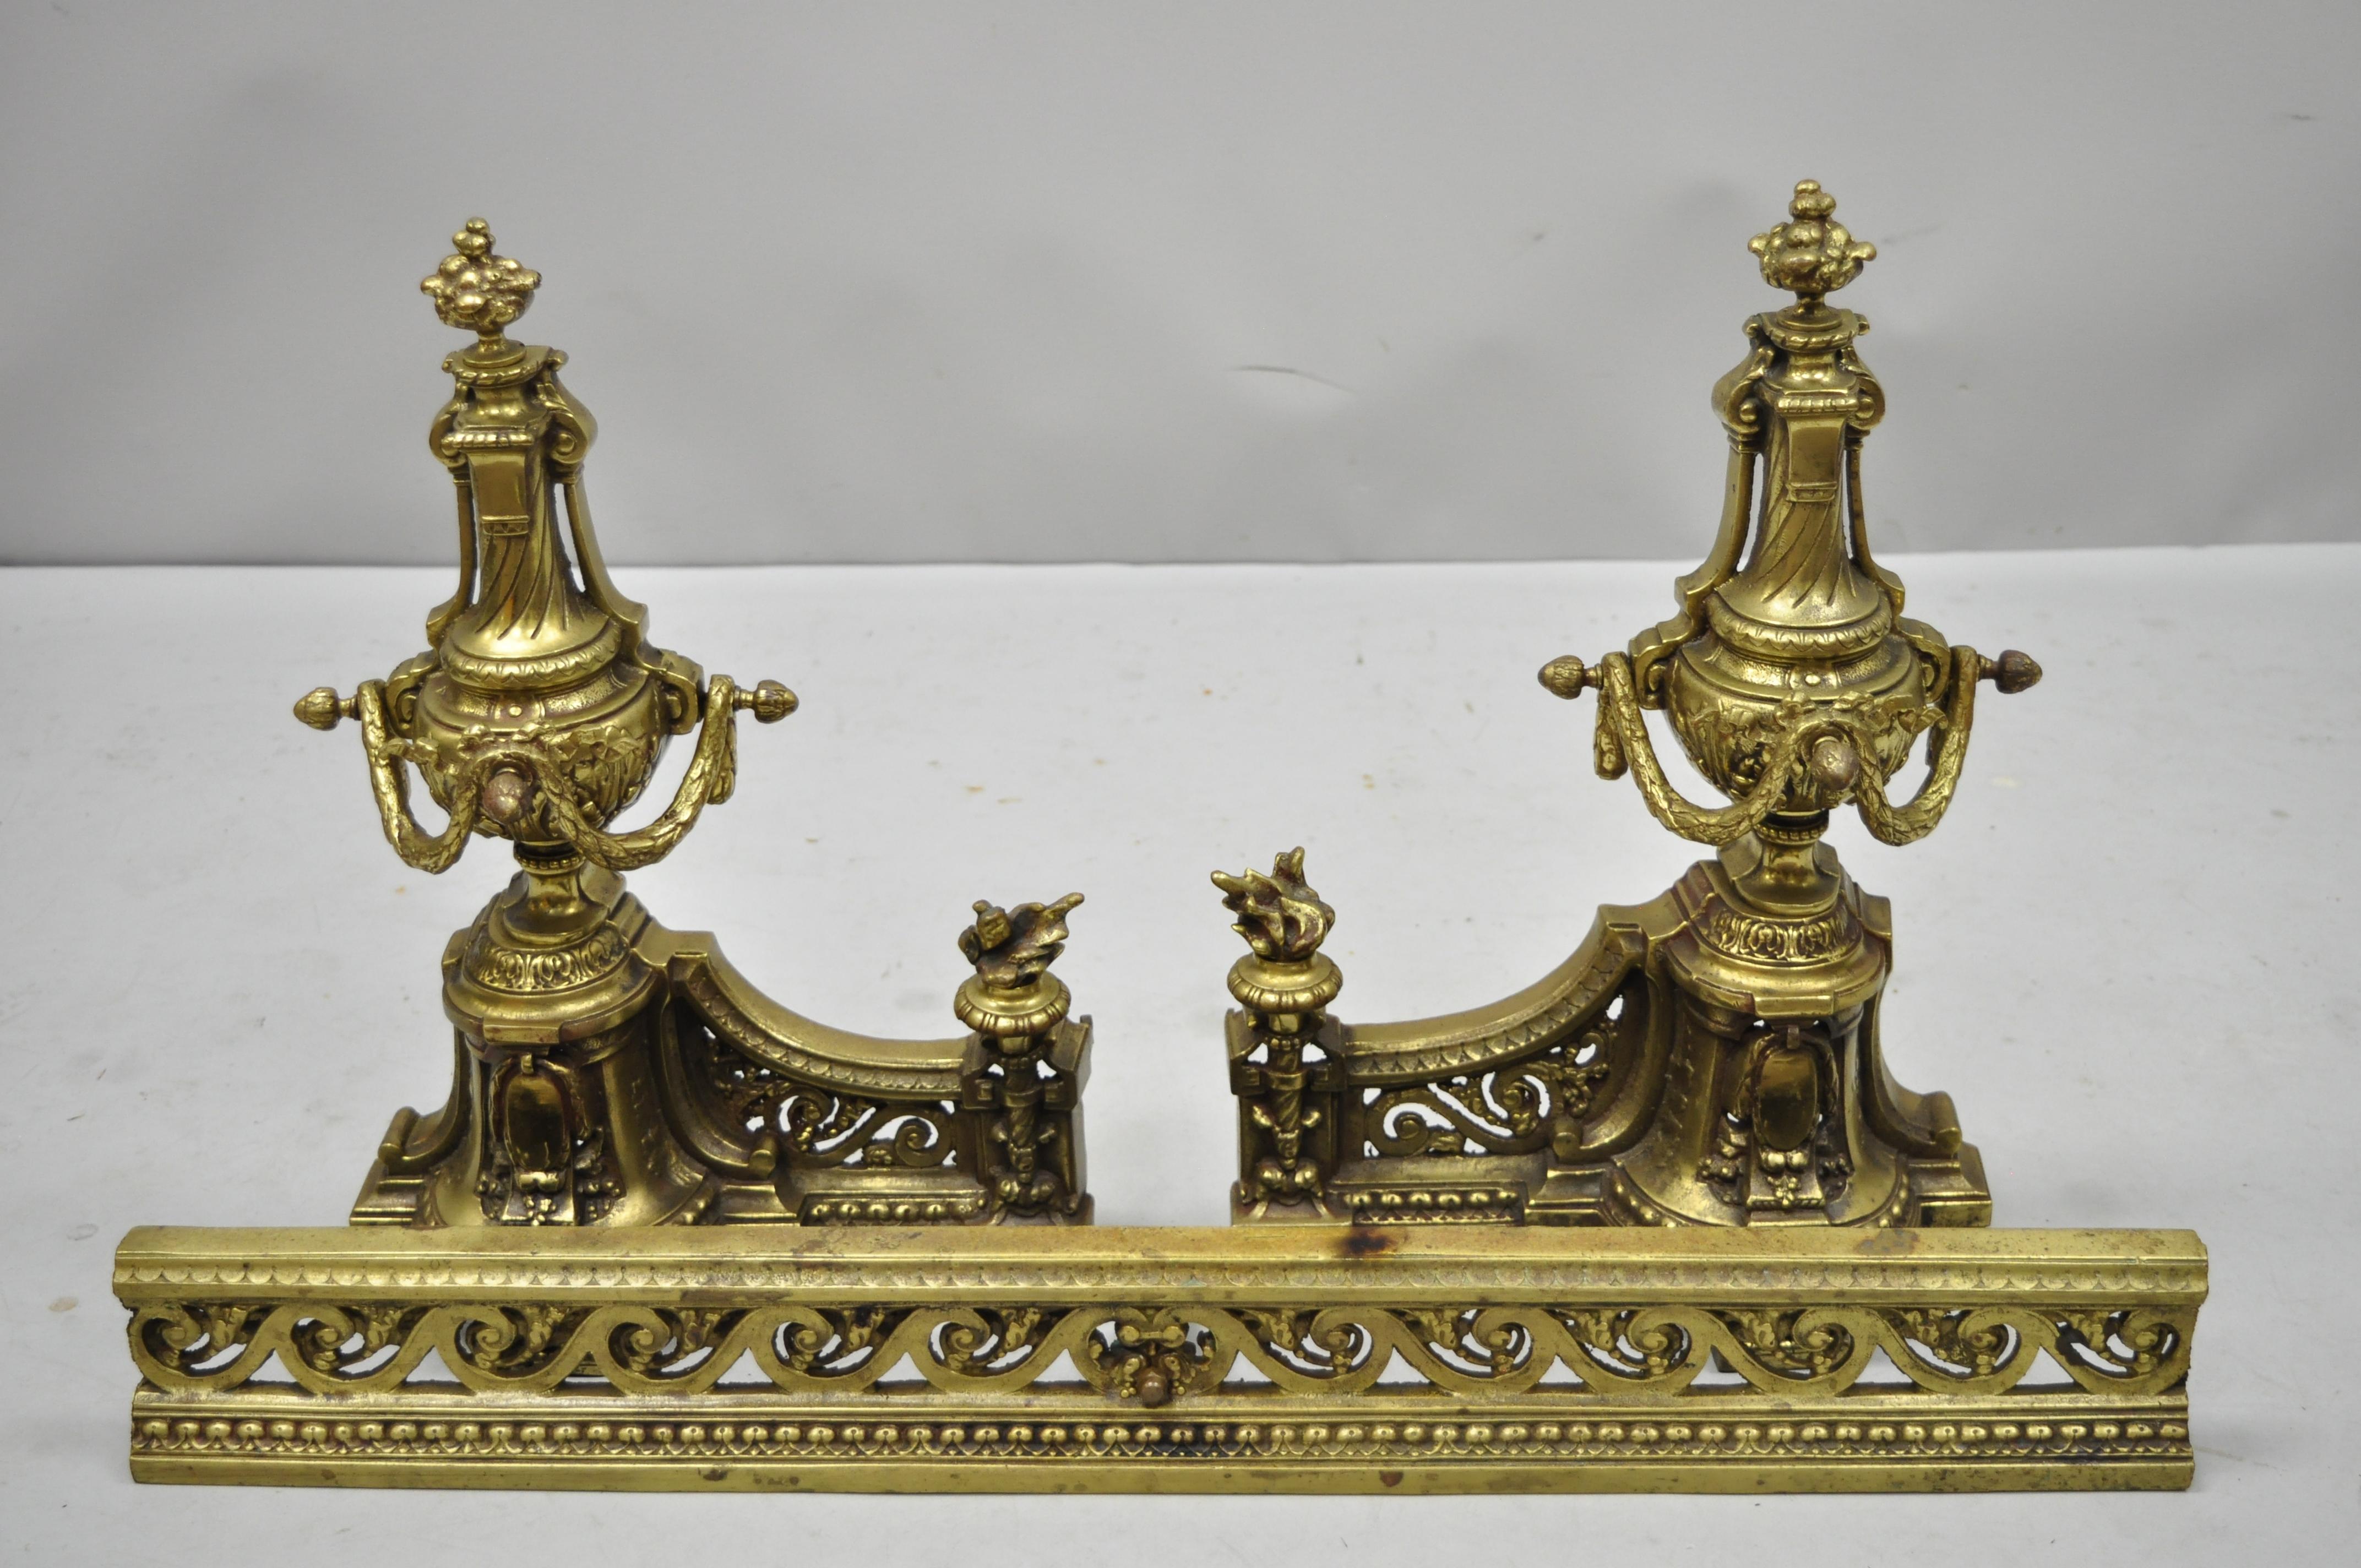 Antique French Louis XVI brass / bronze flame finial pair of andirons with adjustable fender. Item features pair of urn and flame finial andirons, pierced scrollwork fender, finely cast brass/bronze construction, great quality and form, circa early